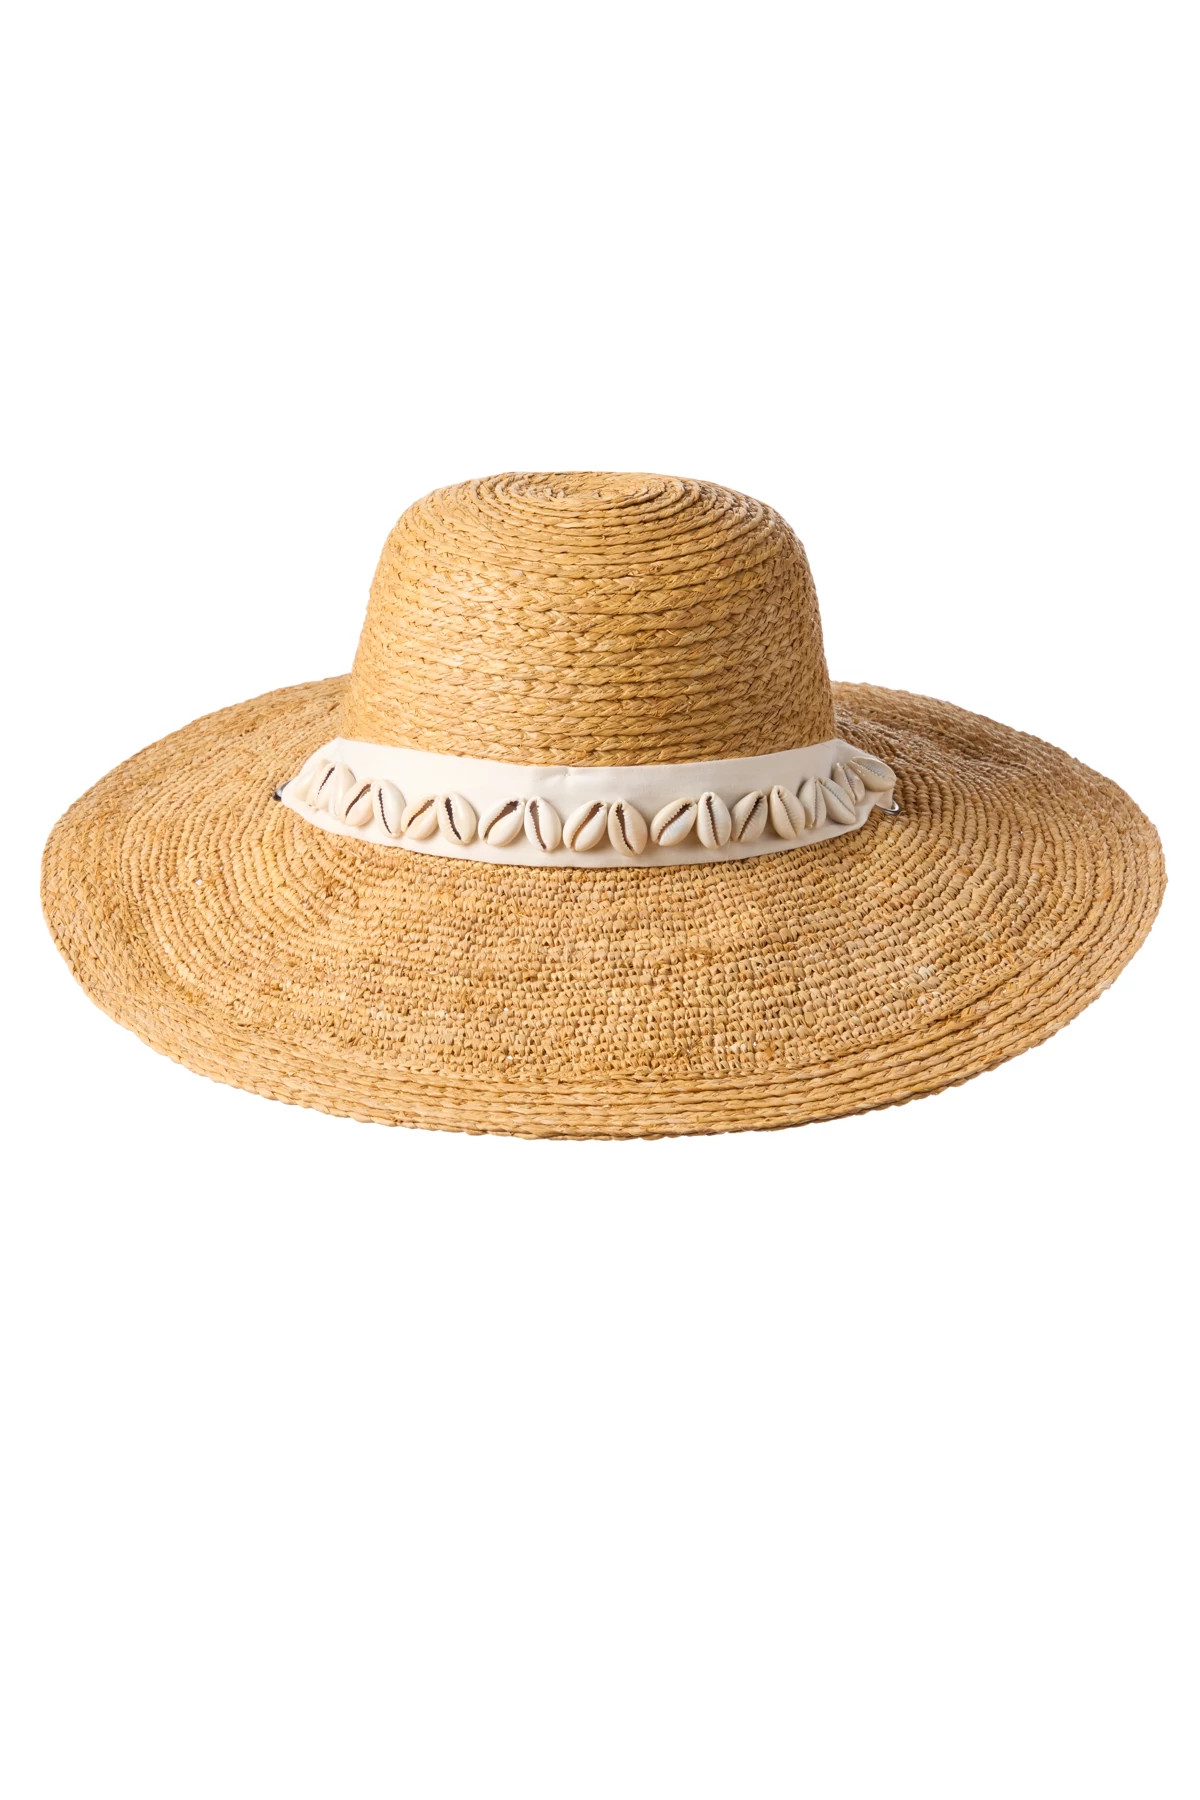 NATURAL Shell Sunhat image number 1